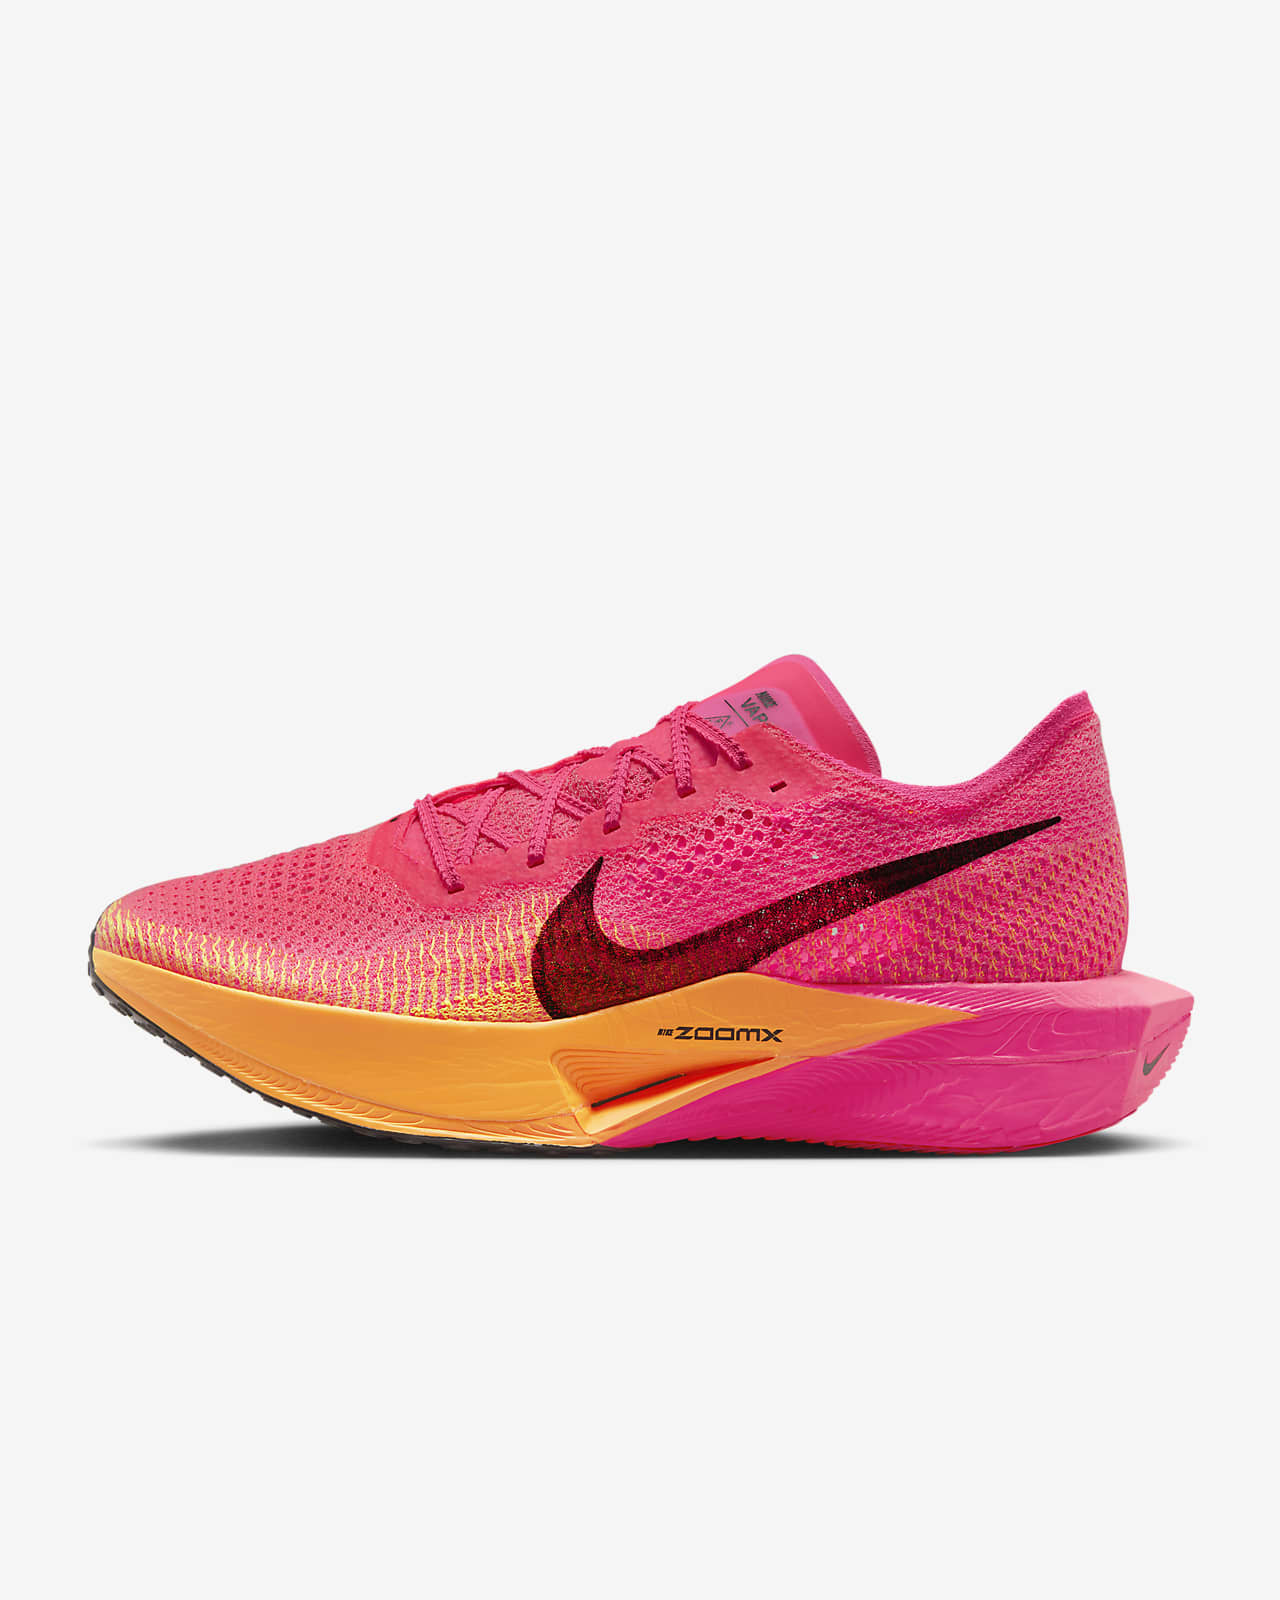 7 Best Nike ZoomX Running Shoes in 2023 | RunRepeat